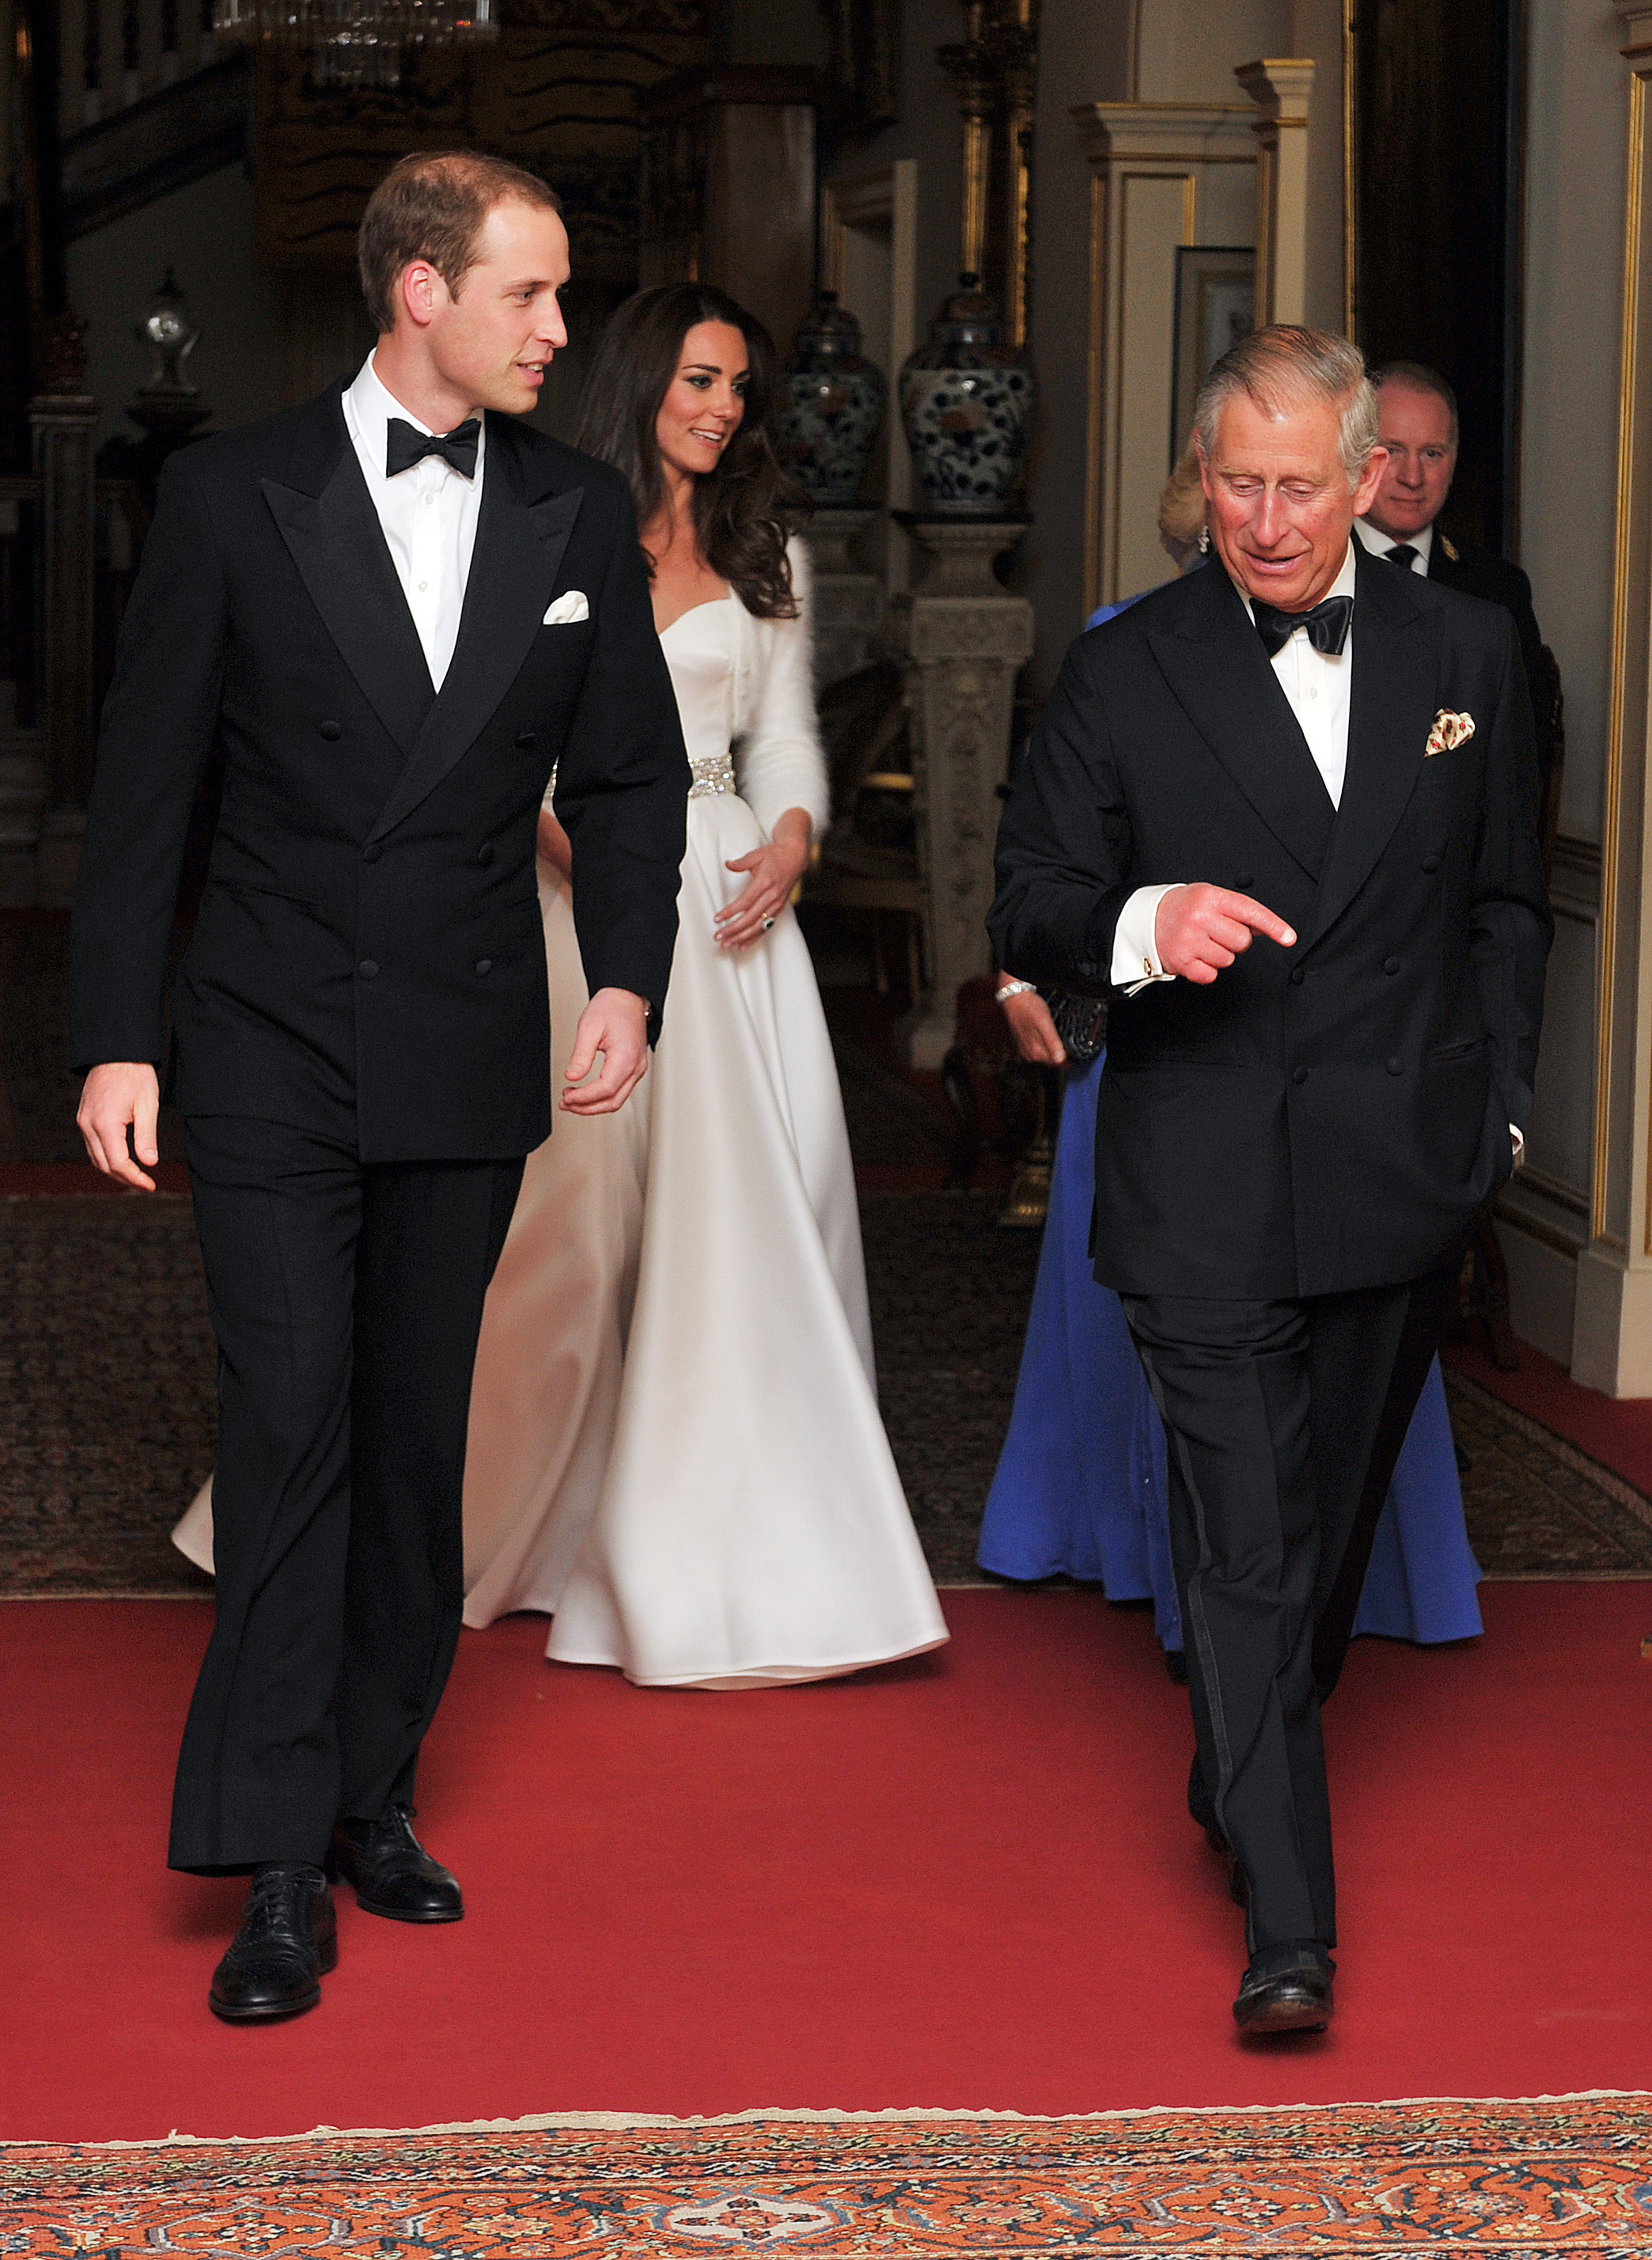 Prince William and Charles walk wearing black suits with bow ties while Kate wears a white gown